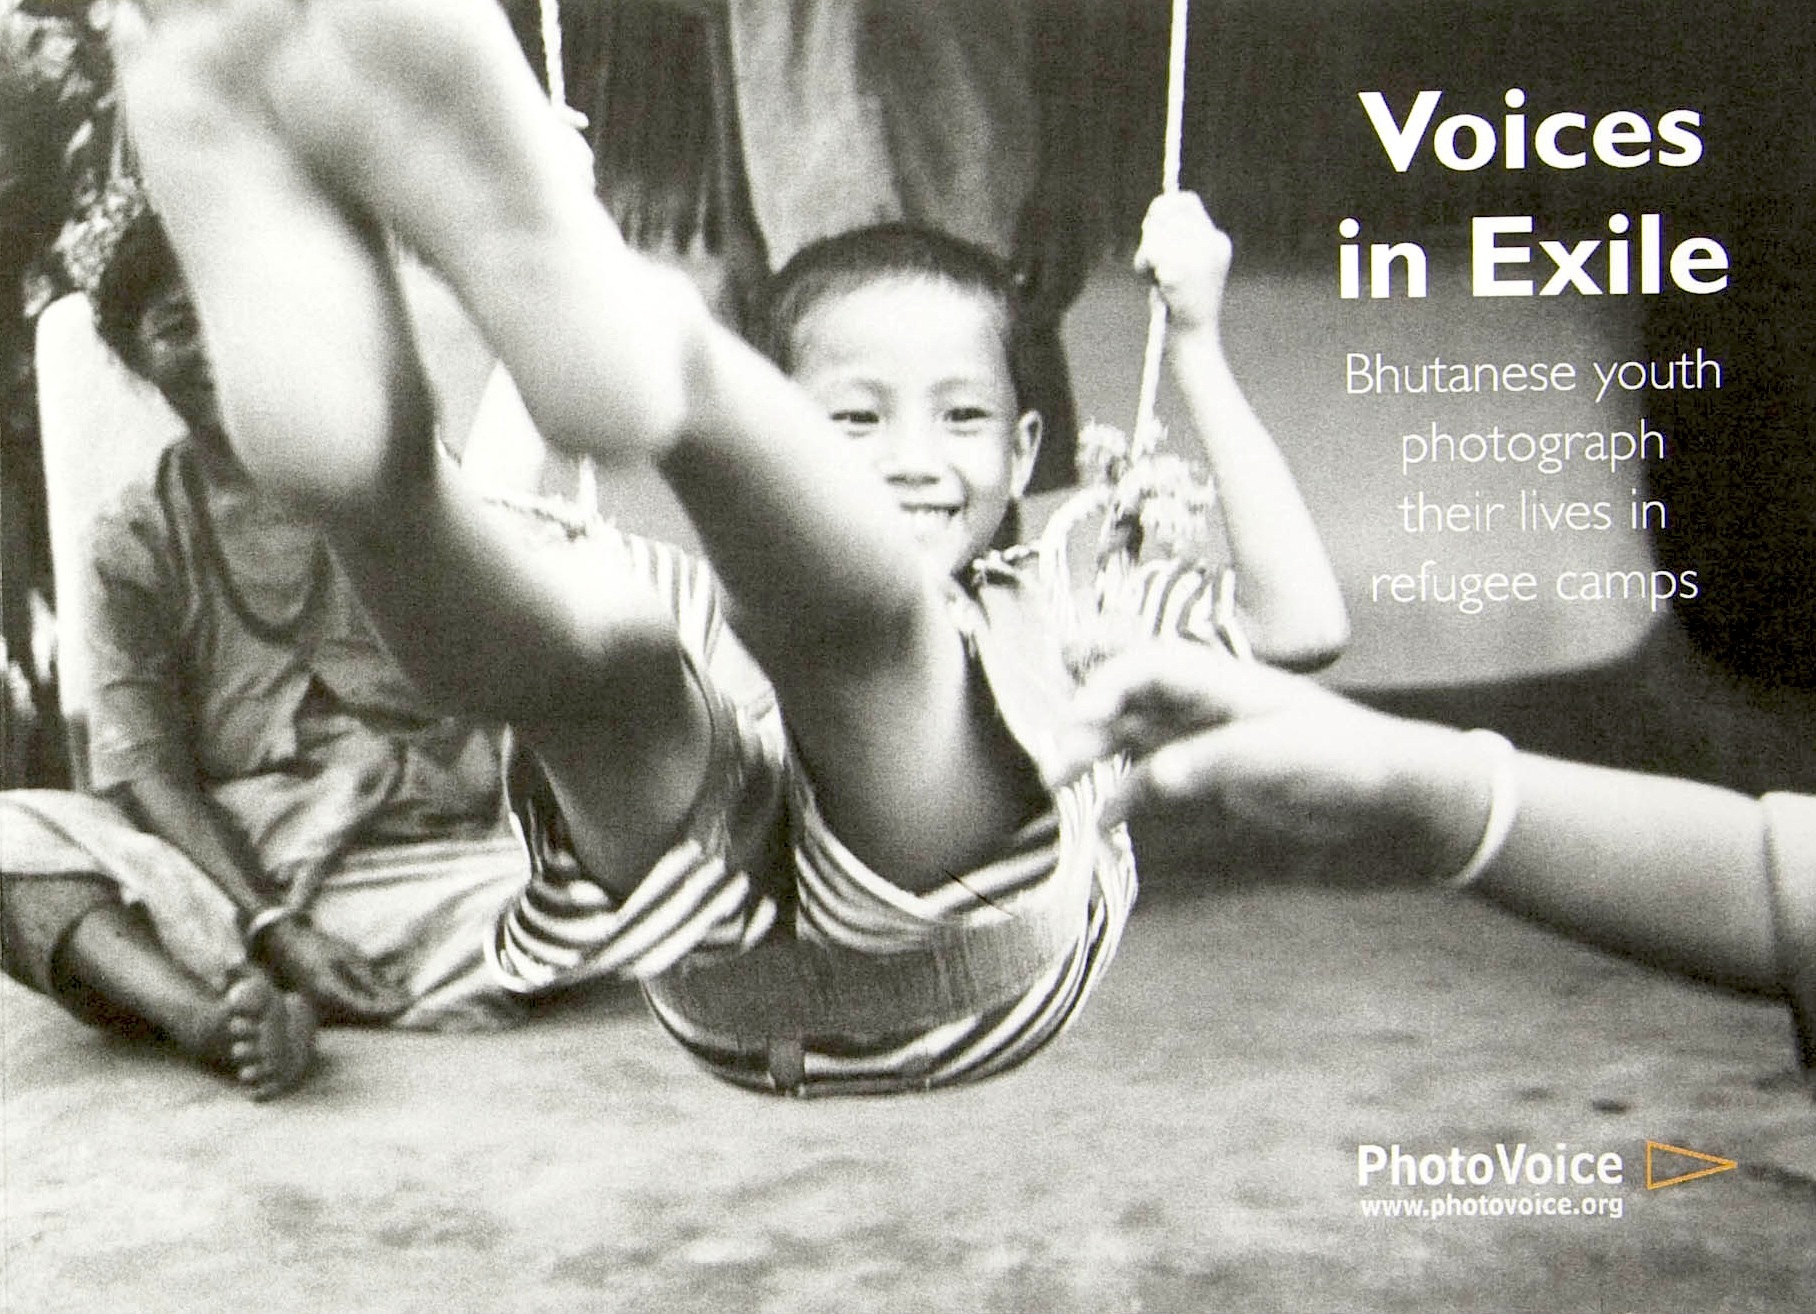 Voices in Exile, Photovoice, 2007